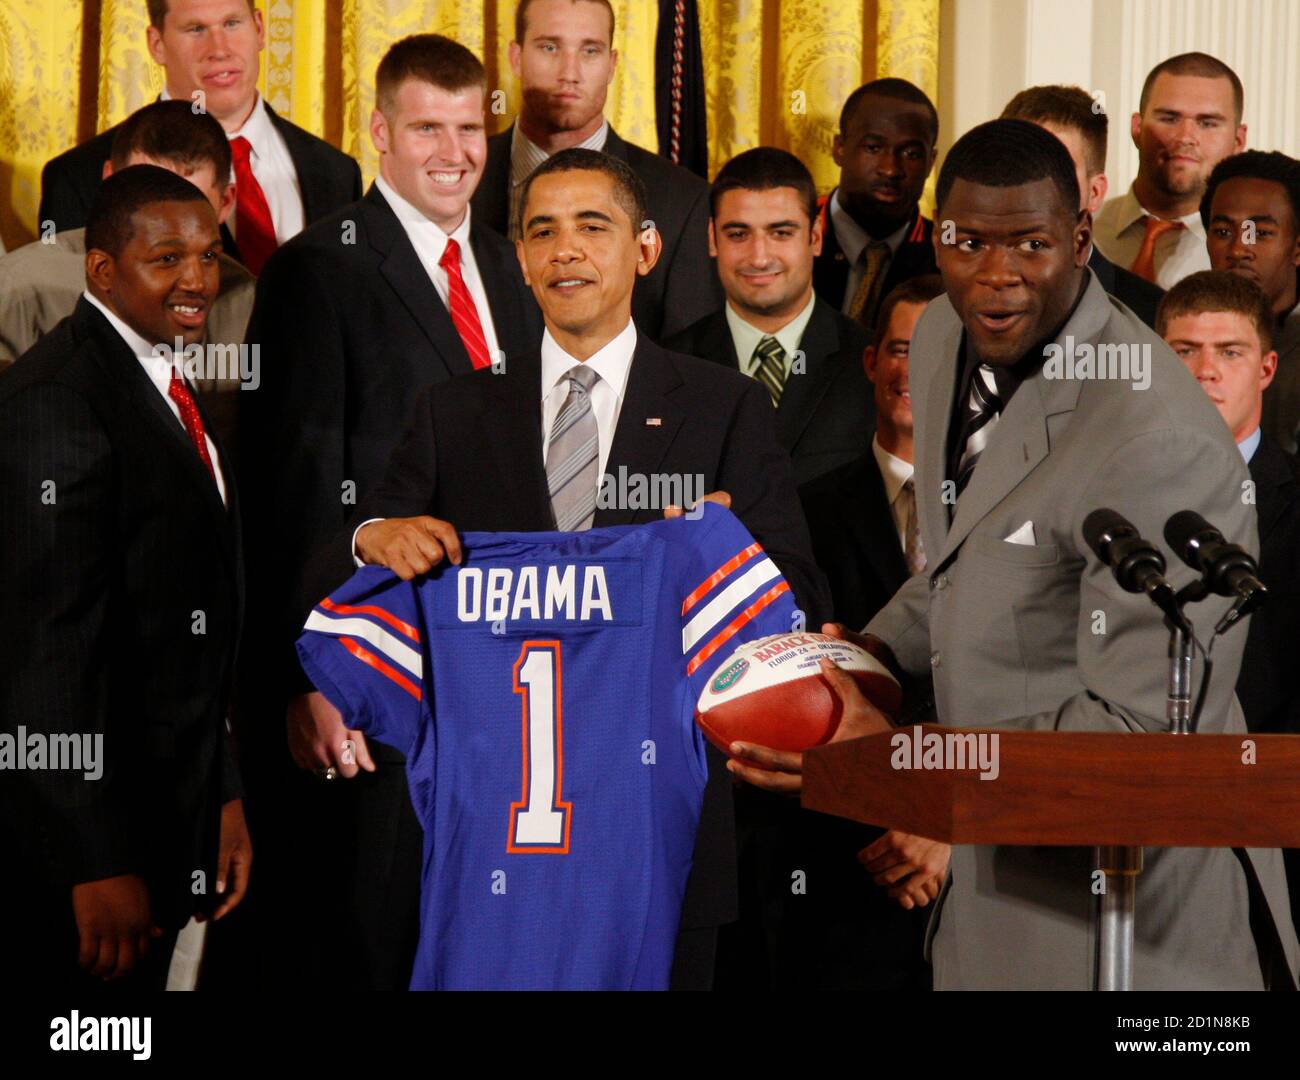 U.S. President Barack Obama (C) is presented with a football jersey by  tight end Cornelius Ingram (R) and other players as Obama welcomes the 2008  NCAA national champions, the University of Florida